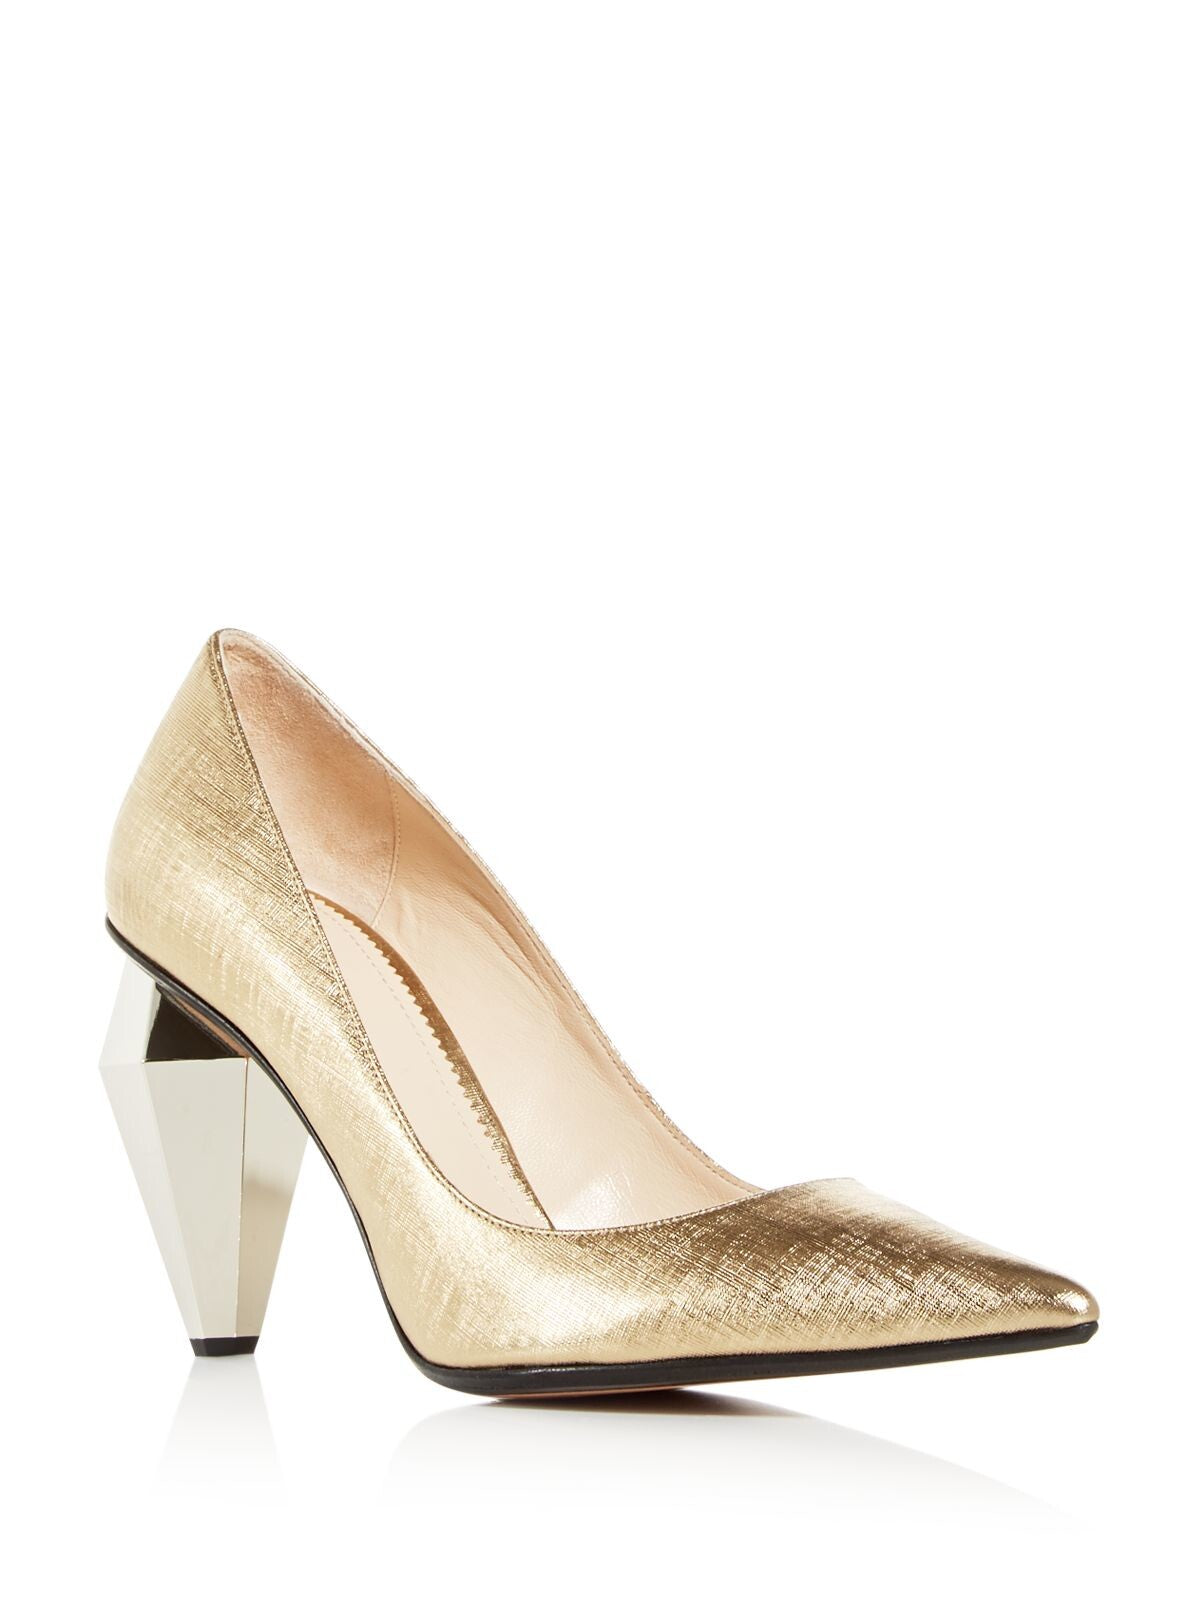 MARC JACOBS Womens Gold Comfort Metallic The Pump Pointed Toe Sculpted Heel Slip On Leather Dress Pumps Shoes 37.5